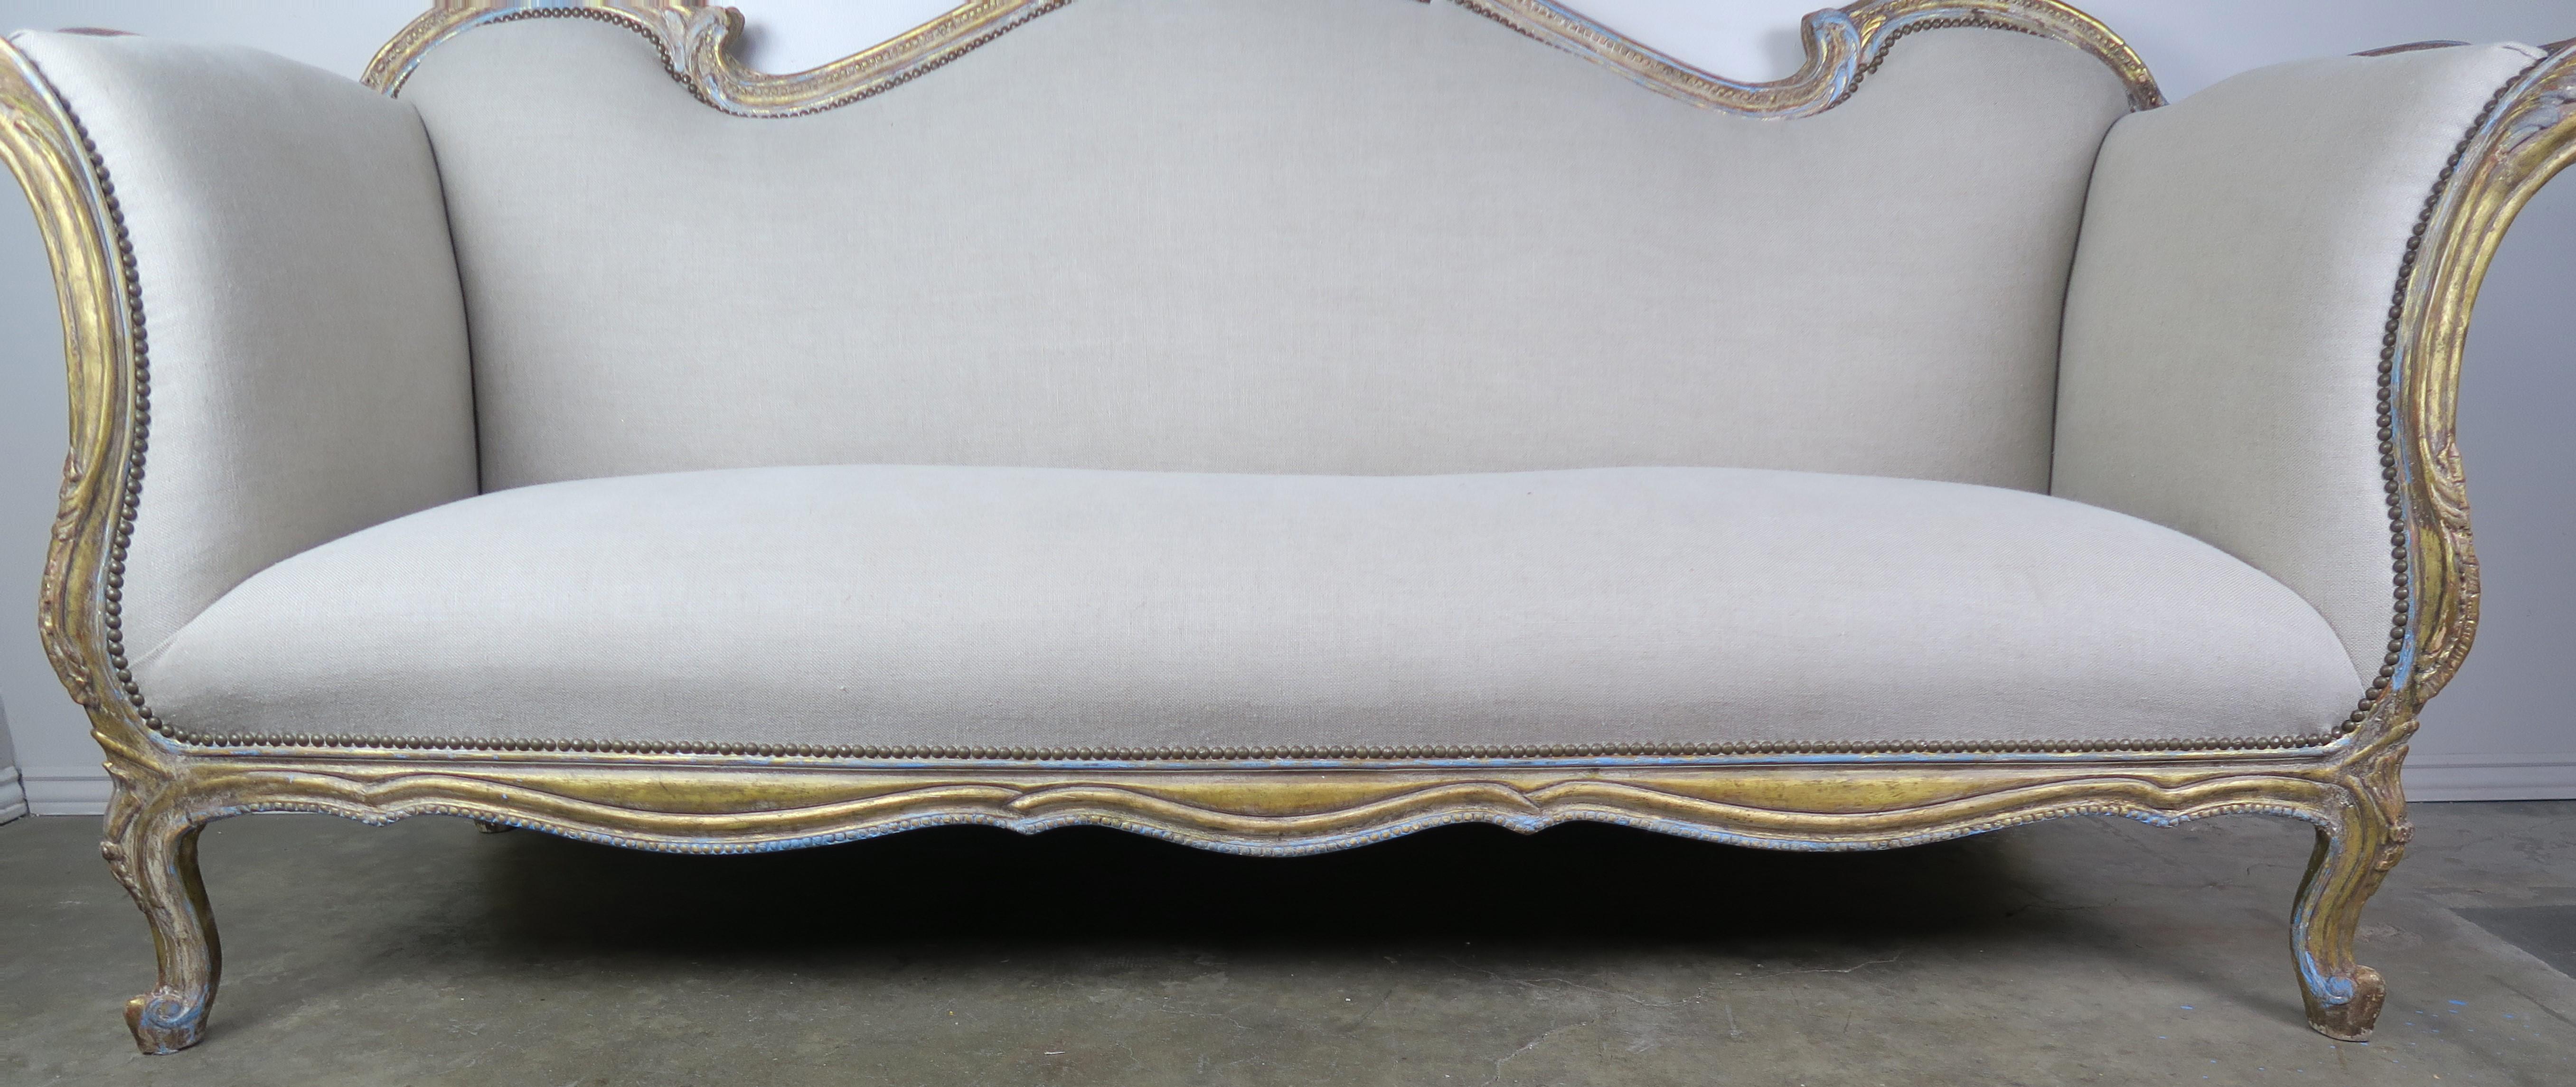 Hand-Carved 19th Century French Louis XV Painted and Parcel-Gilt Carved Wood Sofa